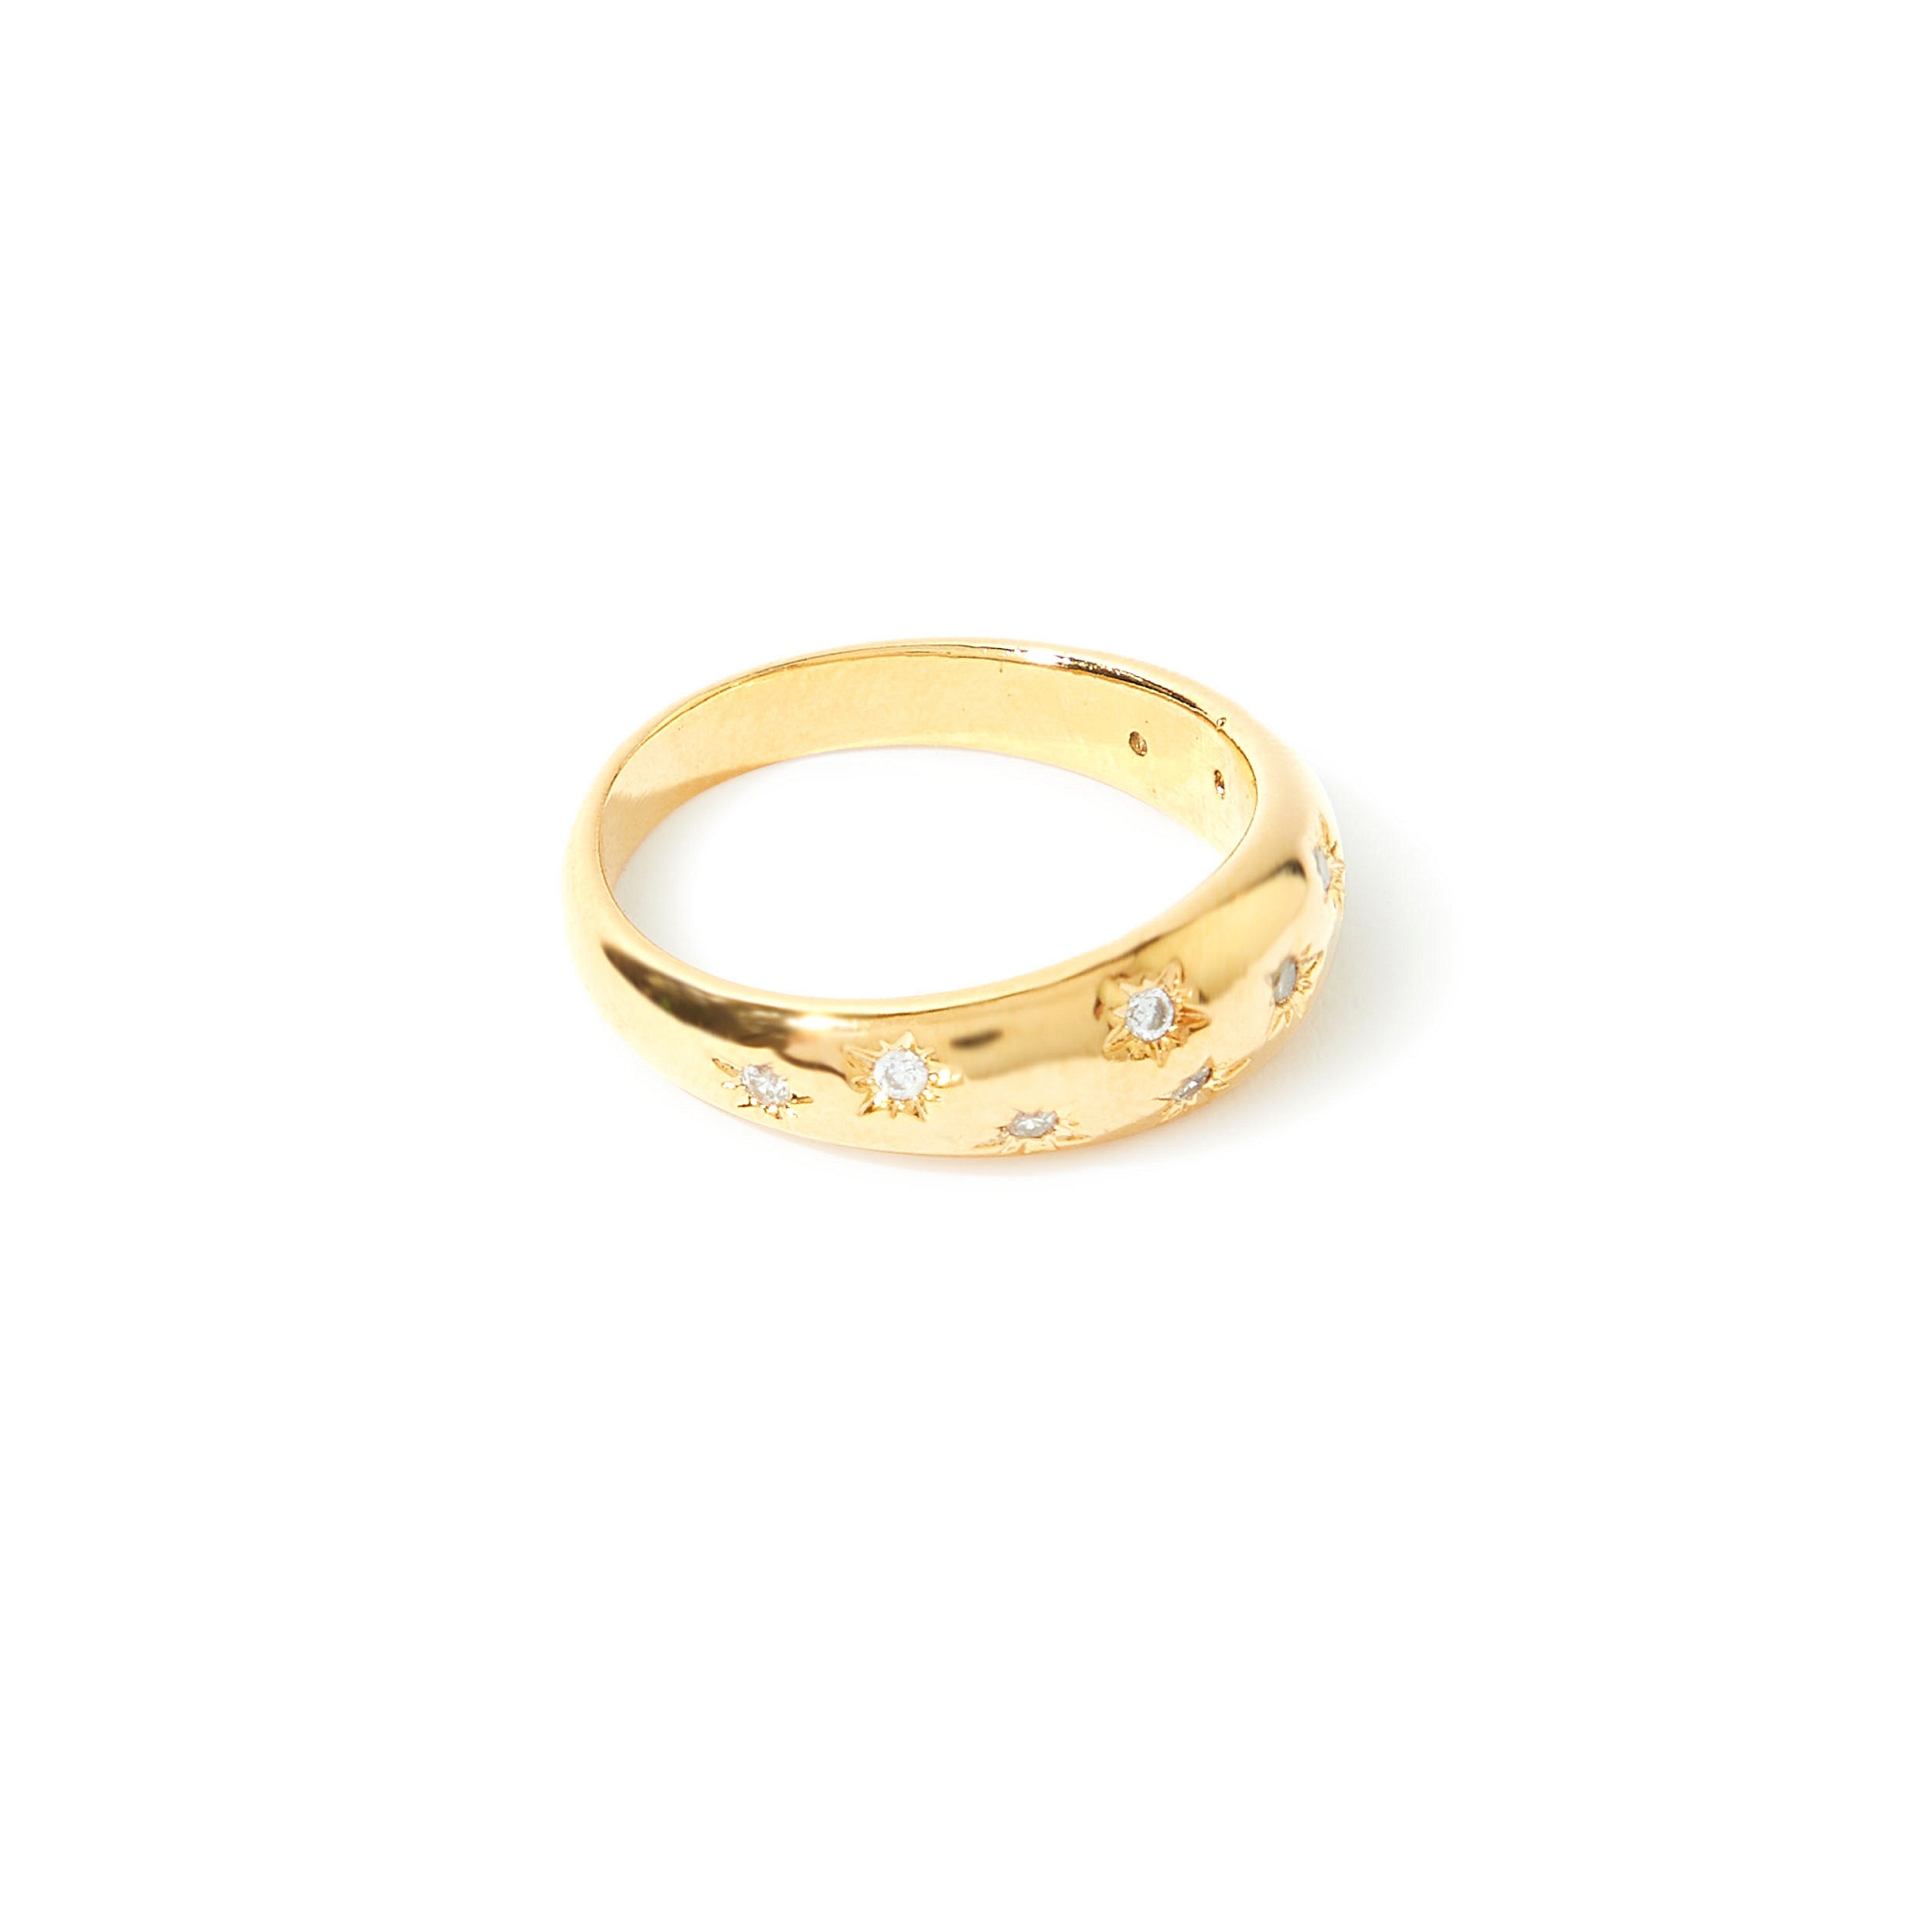 Real Gold Plated Z Chunky Star Ring For Women By Accessorize London